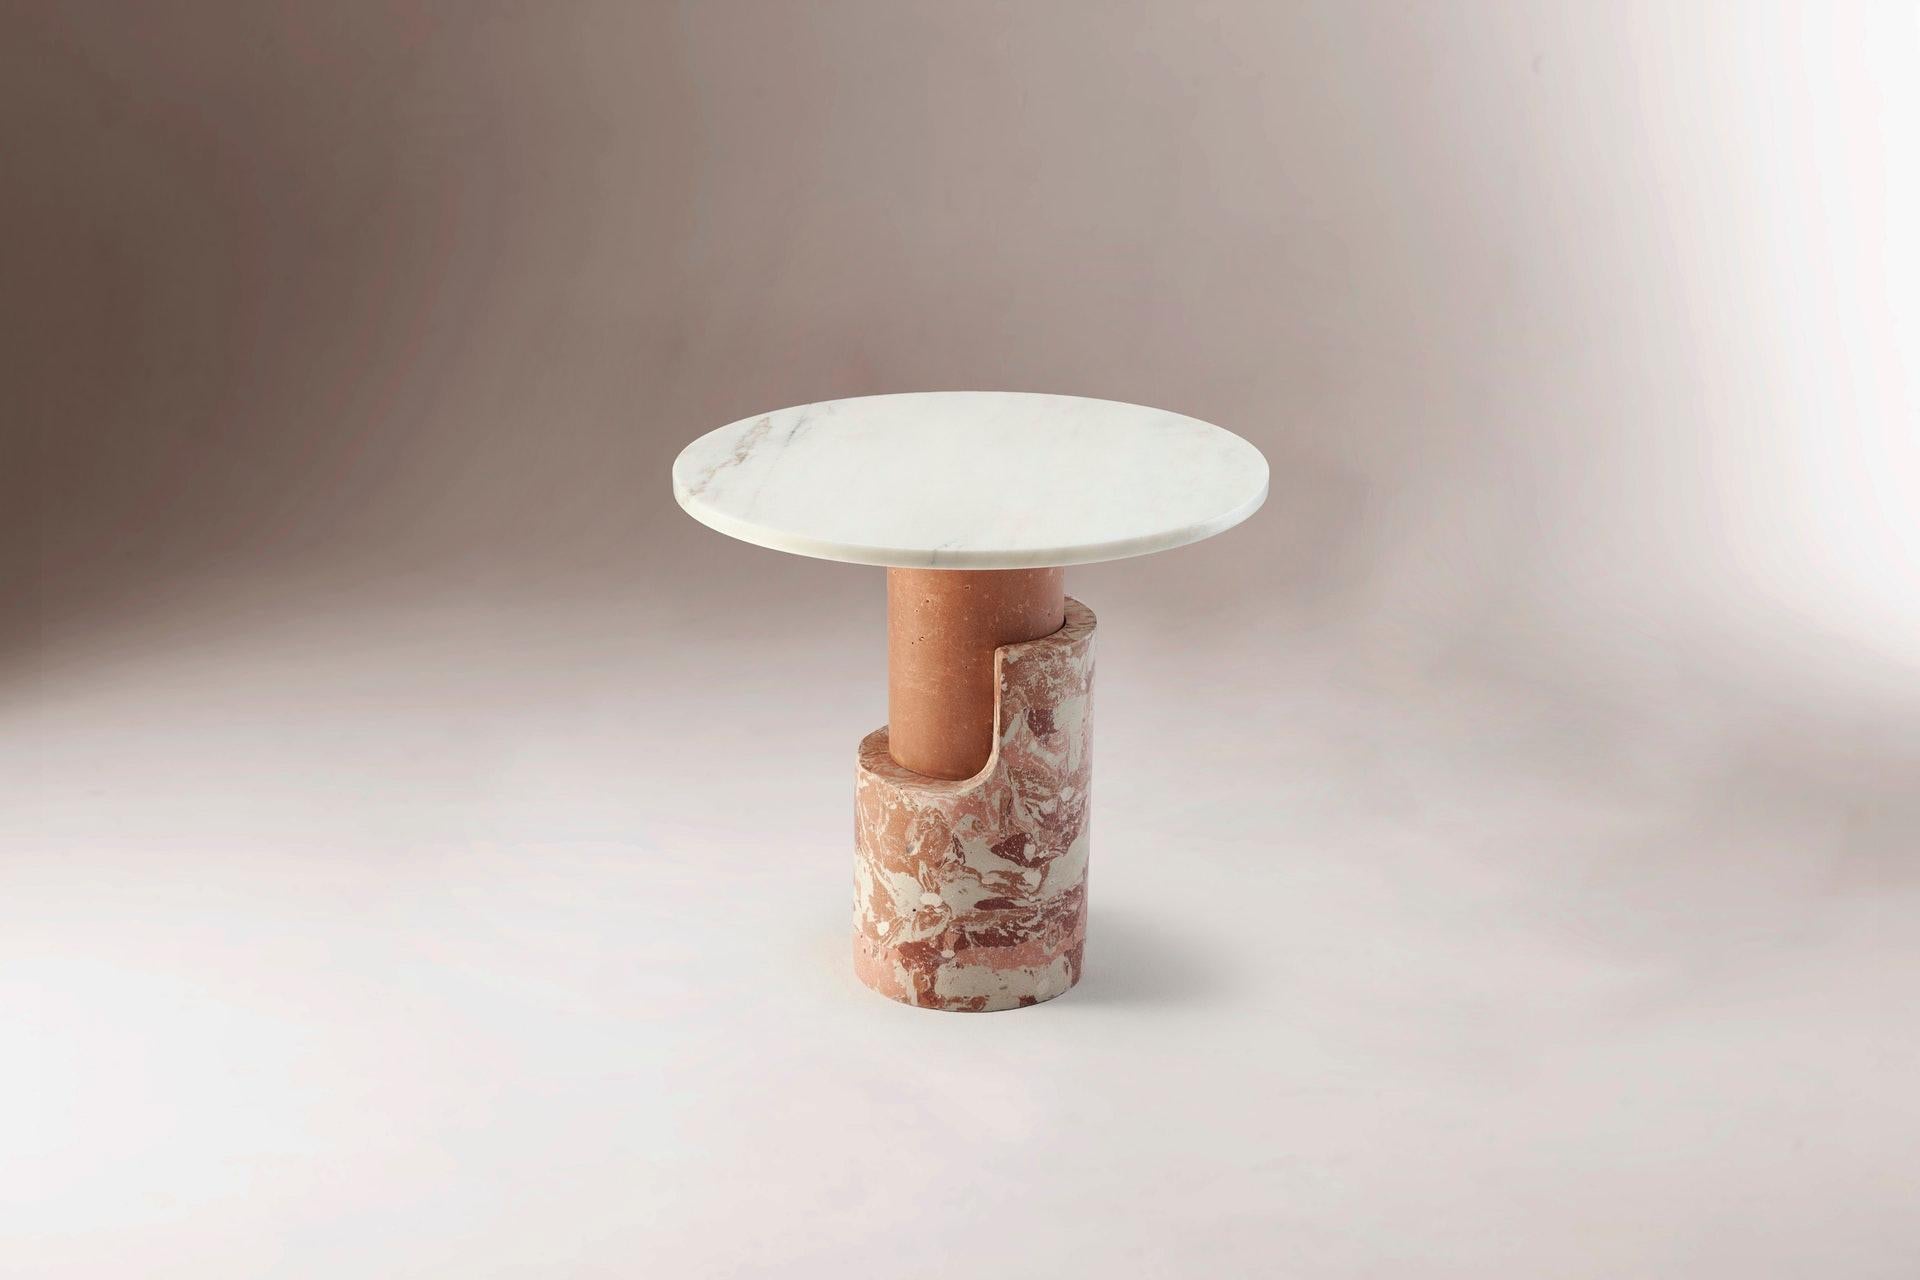 Braque Contemporary marble side table by Dooq
Dimensions: W 60 x D 60 x H 55 cm
Materials: Entirely hand made in marble

Product
The Braque Side Table is an elegant and slick side table created by Dooq. Braque is entirely hand made in marble,